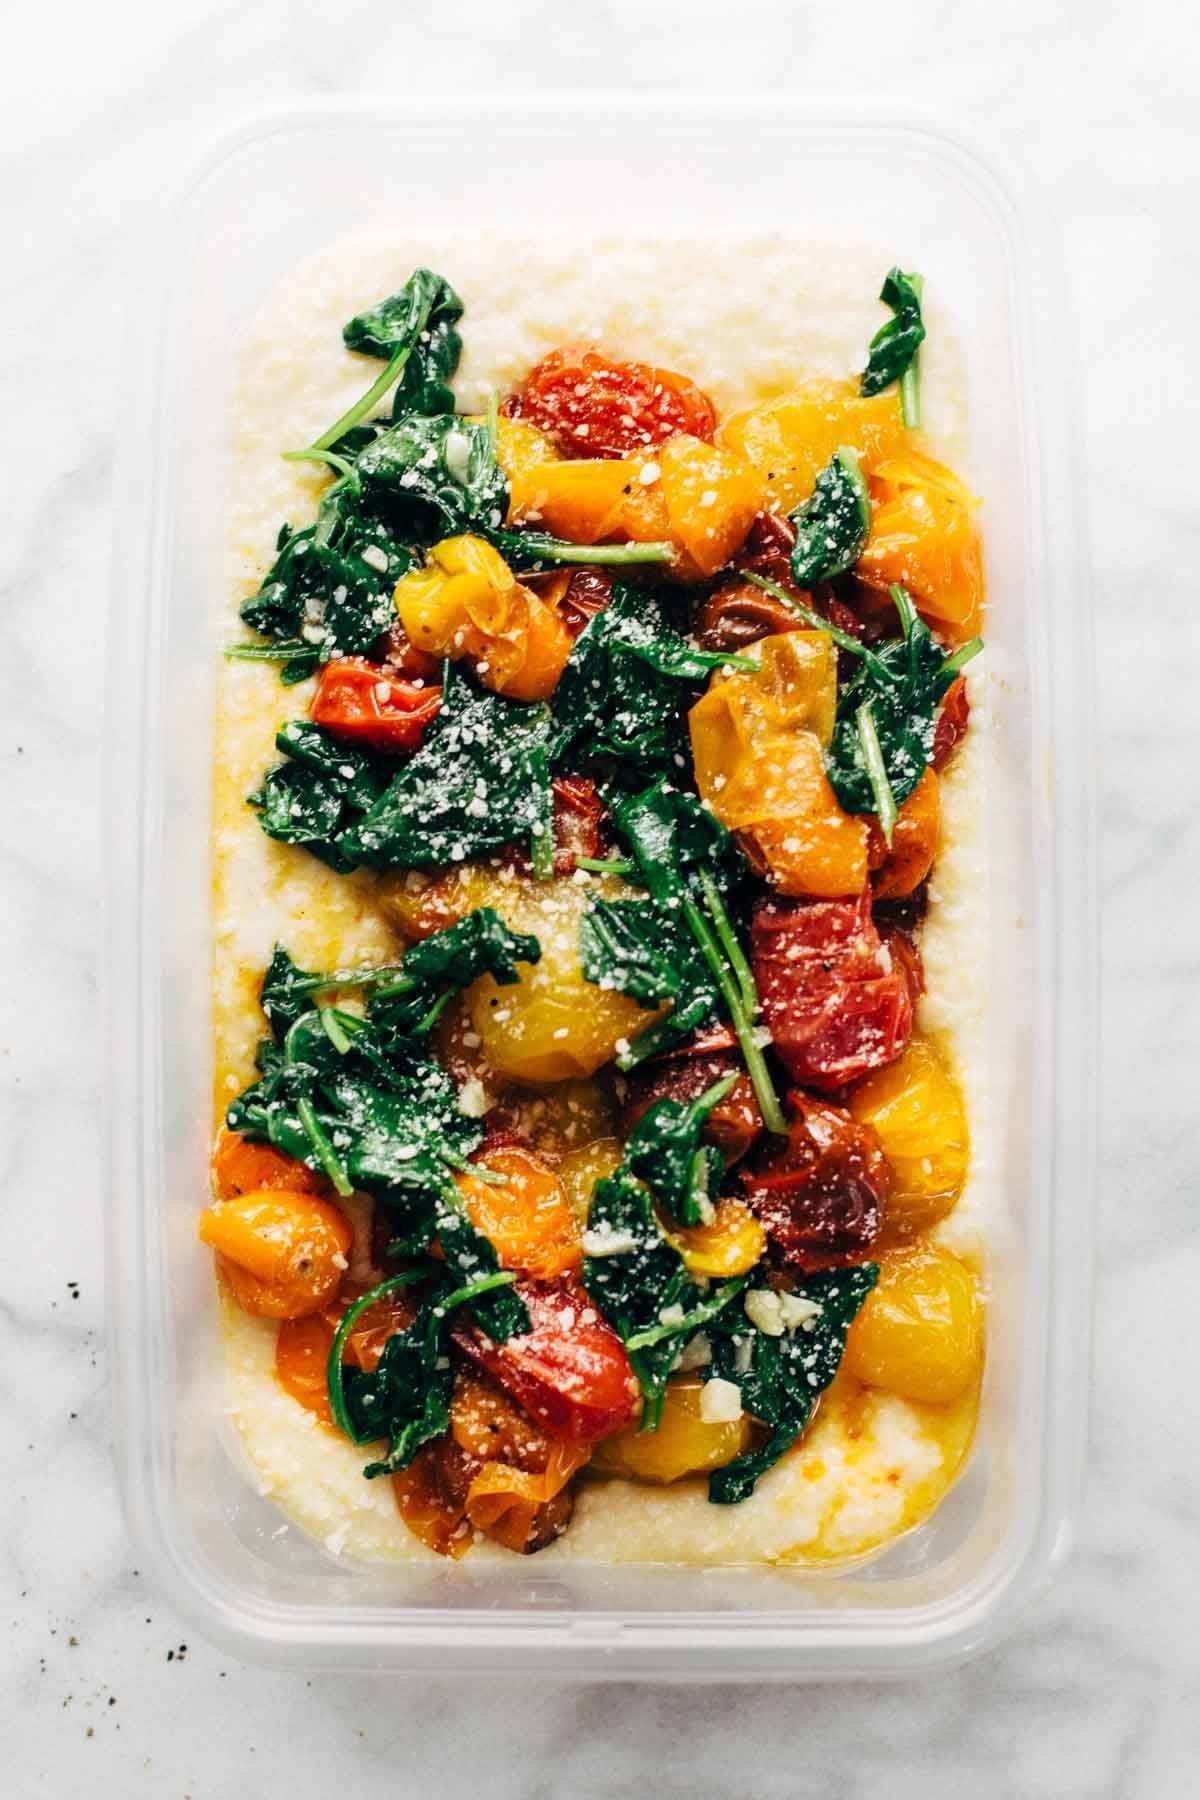 Roasted Tomatoes with Goat Cheese Polenta ♡ an easy vegetarian recipe adaptable to whatever veggies you have on hand. | pinchofyum.com